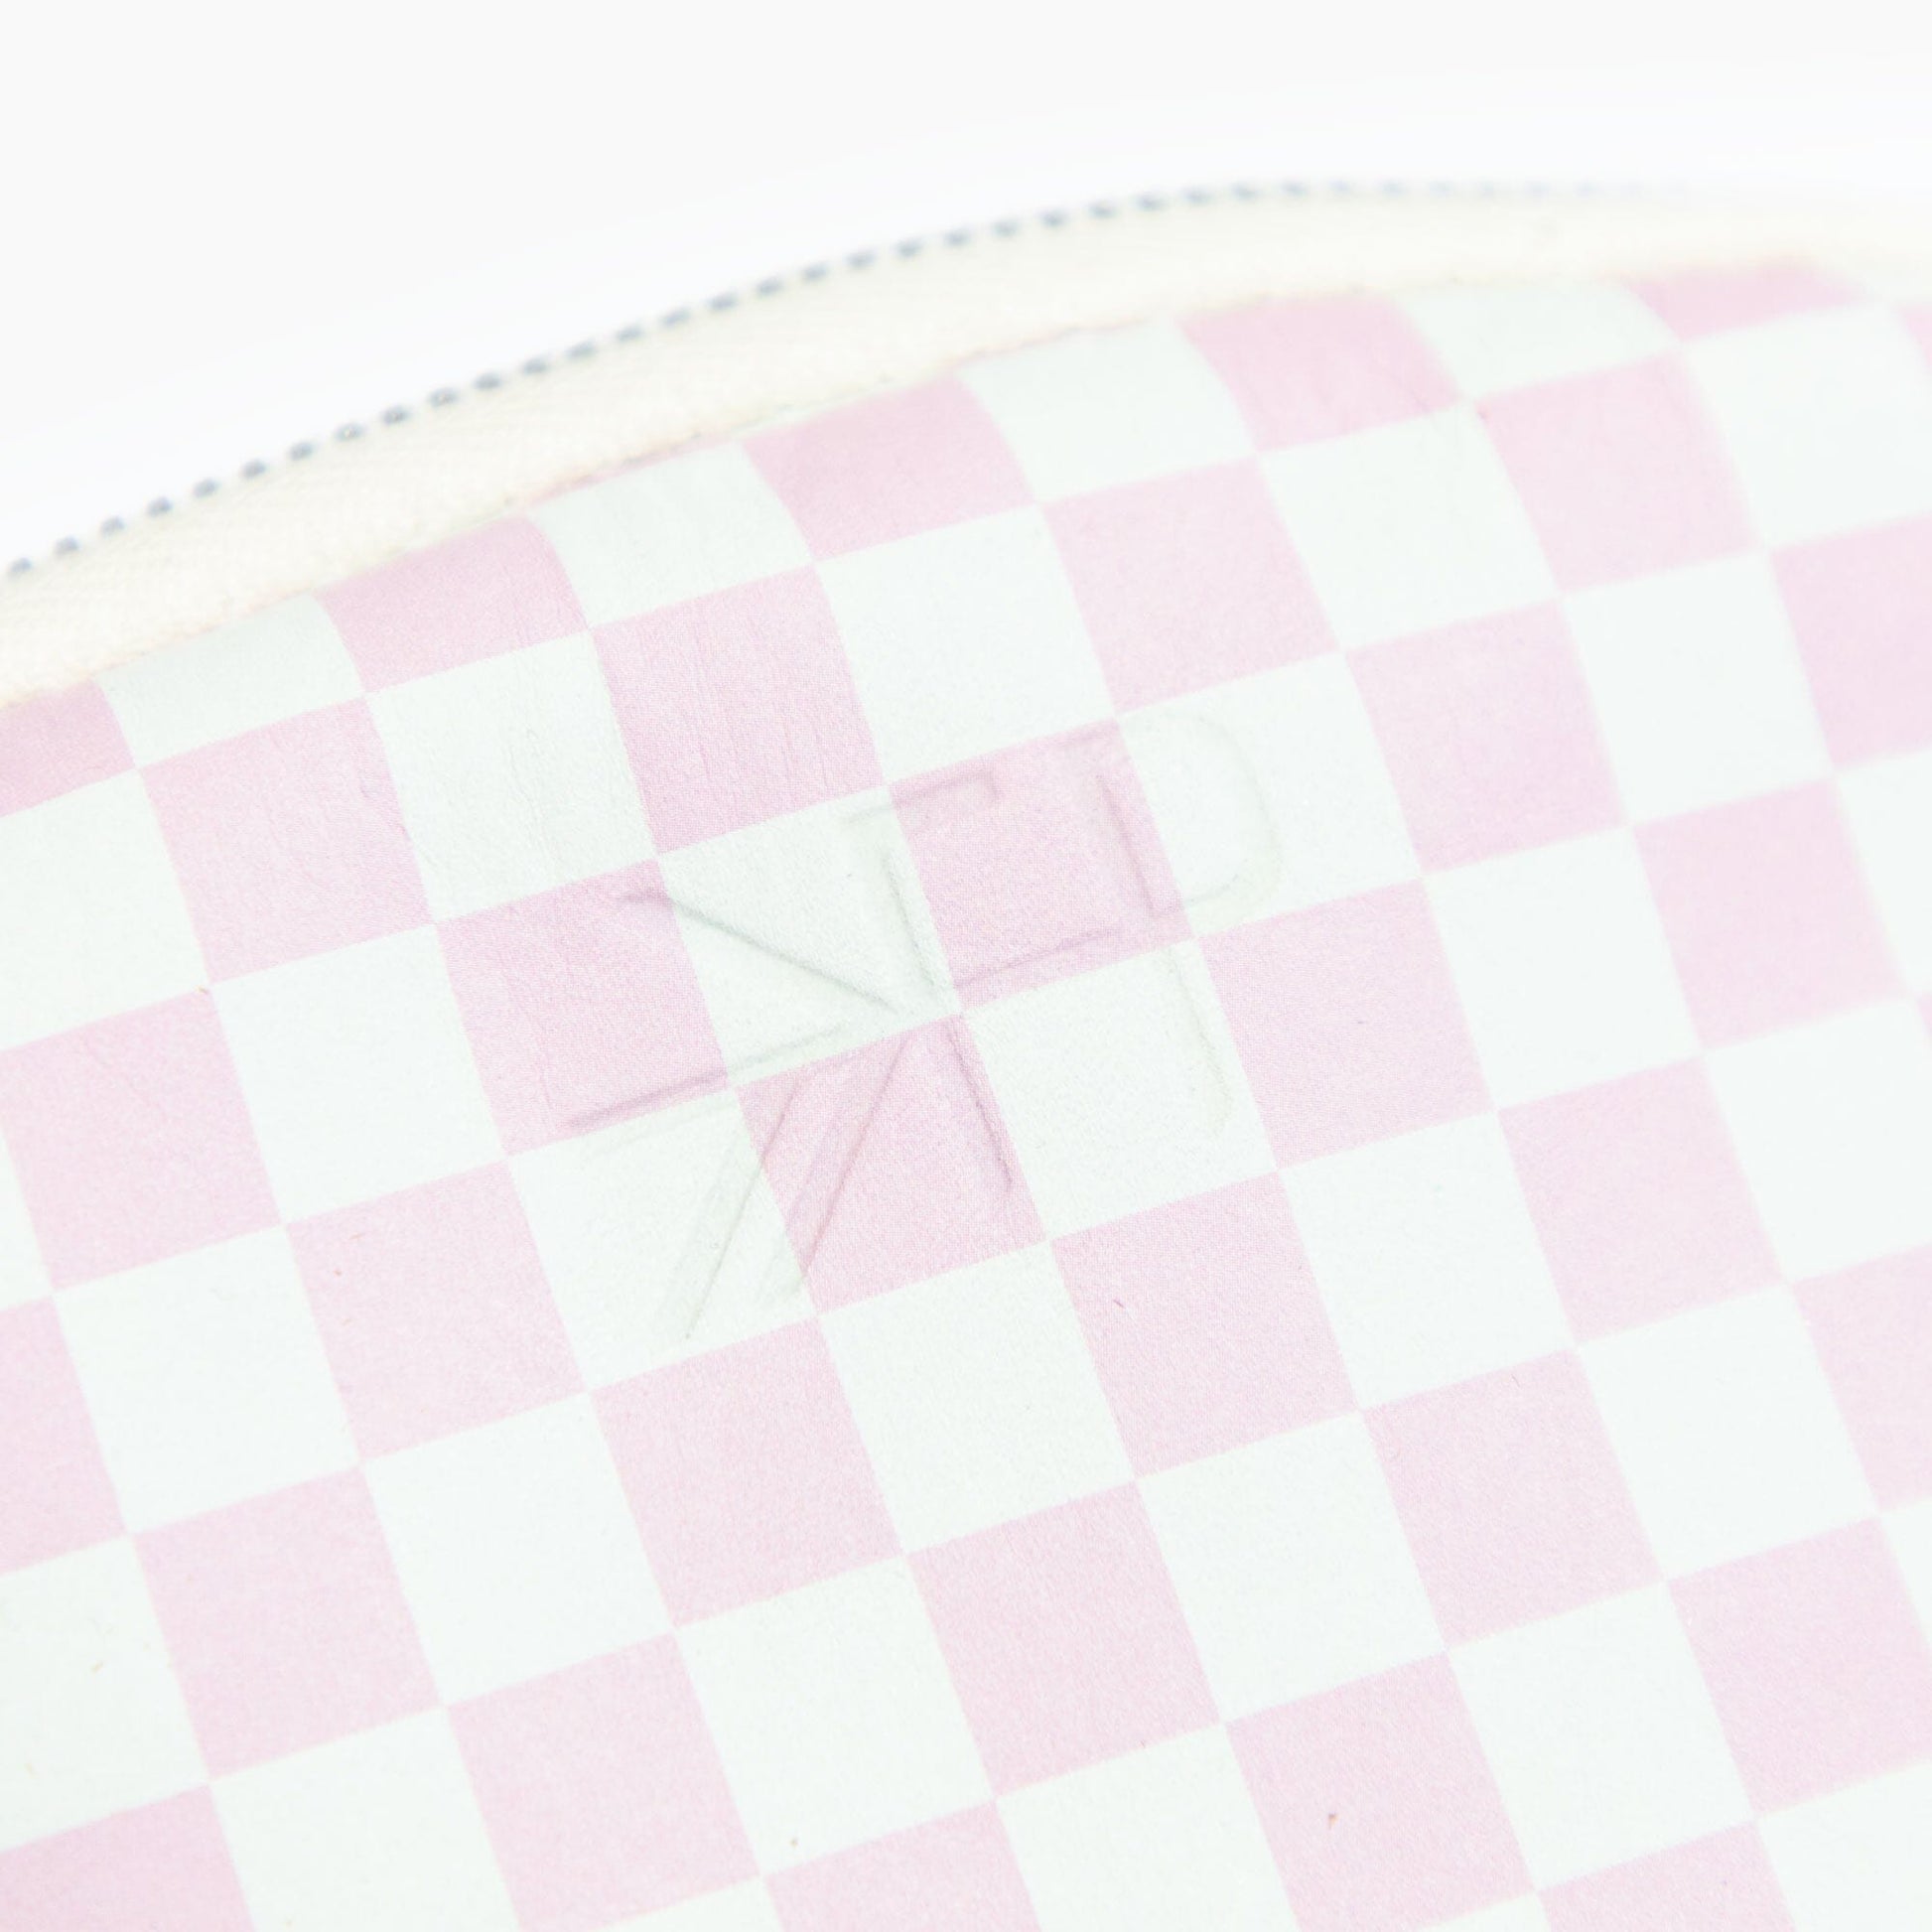 Petal Pink Check Cosmetic Pouch Cosmetic Pouch In House Bag 